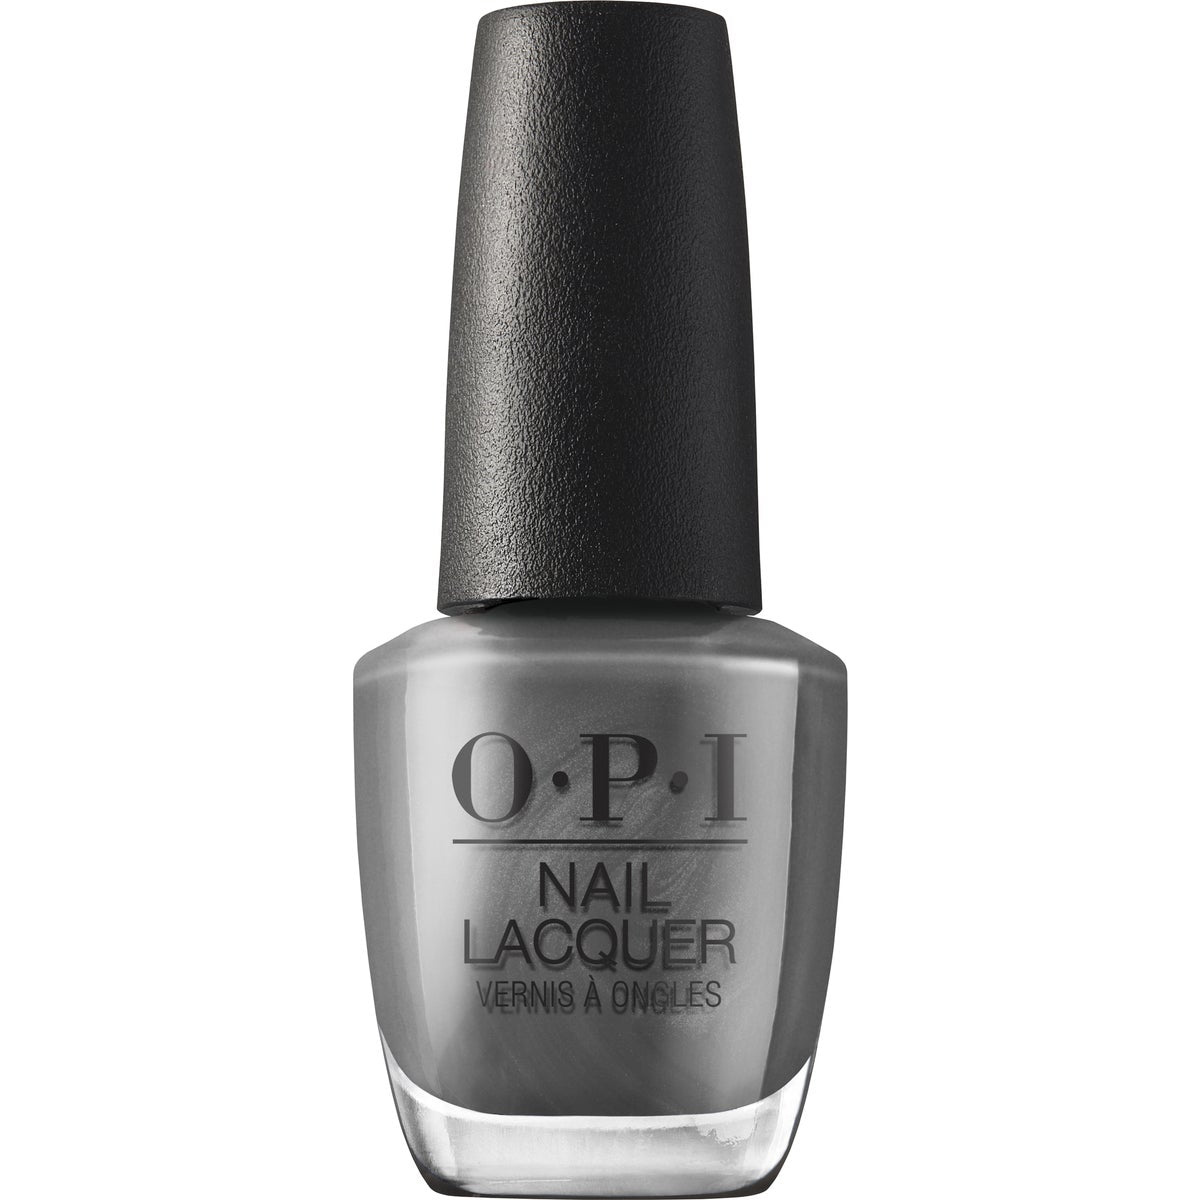 OPI Nail Lacquer - Clean Slate